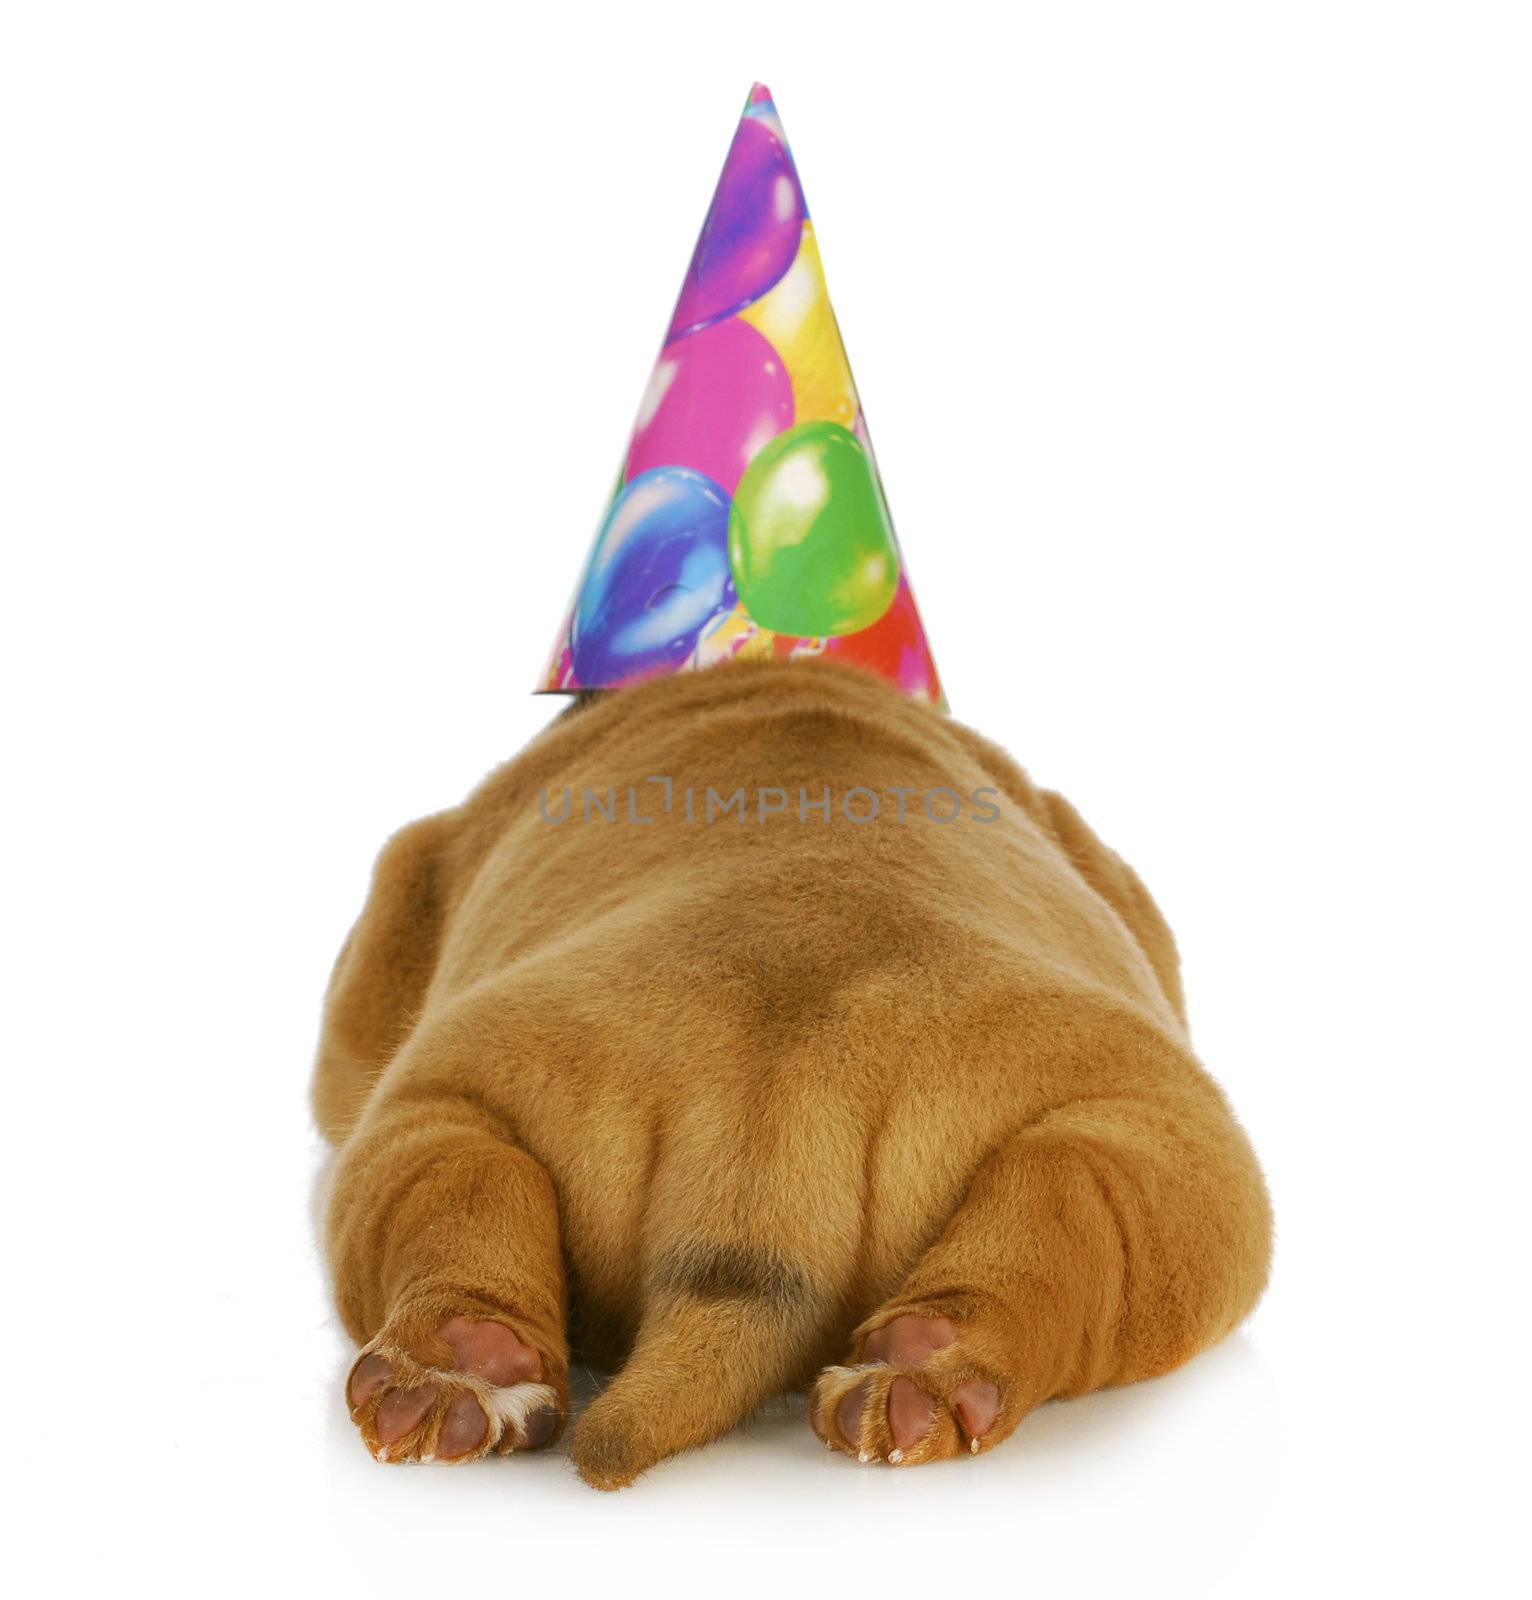 birthday dog - dogue de bordeaux puppy wearing birthday hat photographed from the rear view